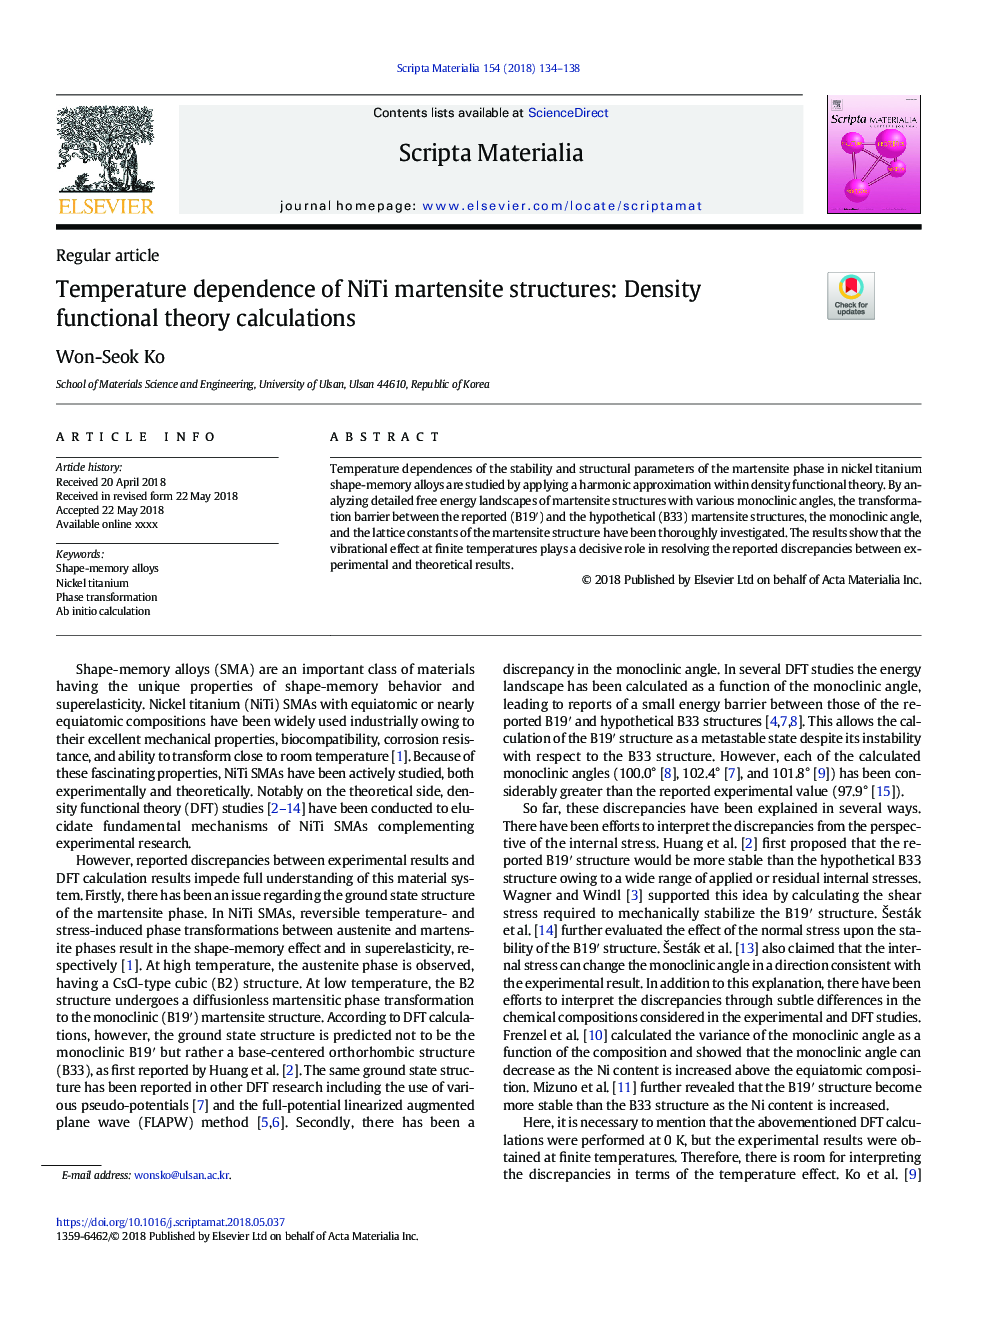 Temperature dependence of NiTi martensite structures: Density functional theory calculations